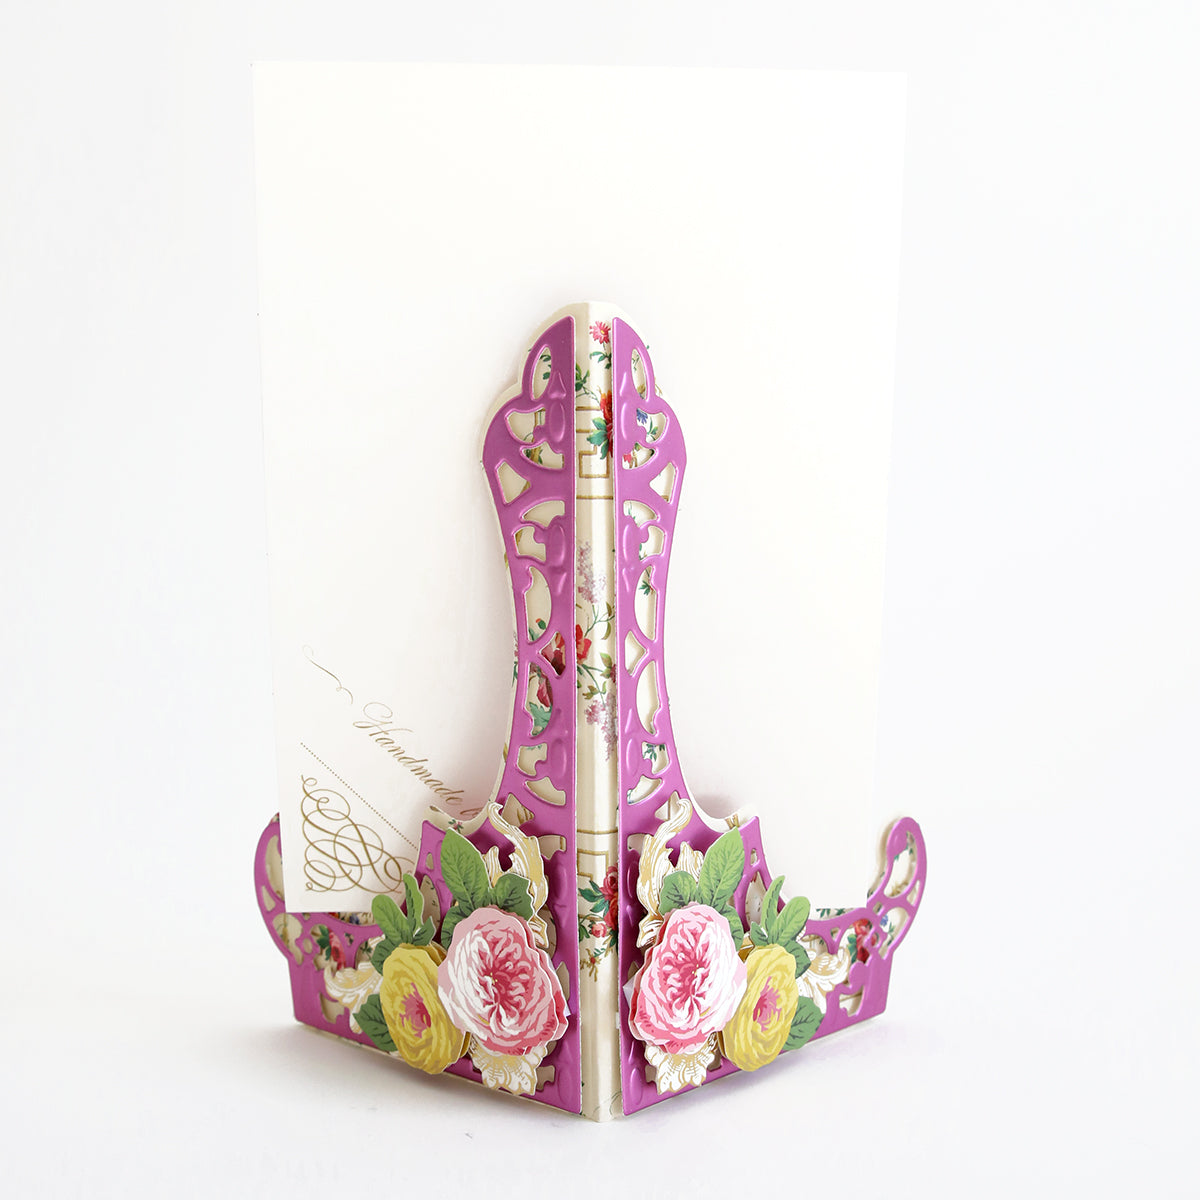 A purple Tall Card Stand Dies with flowers on it, perfect for displaying oversized cards.